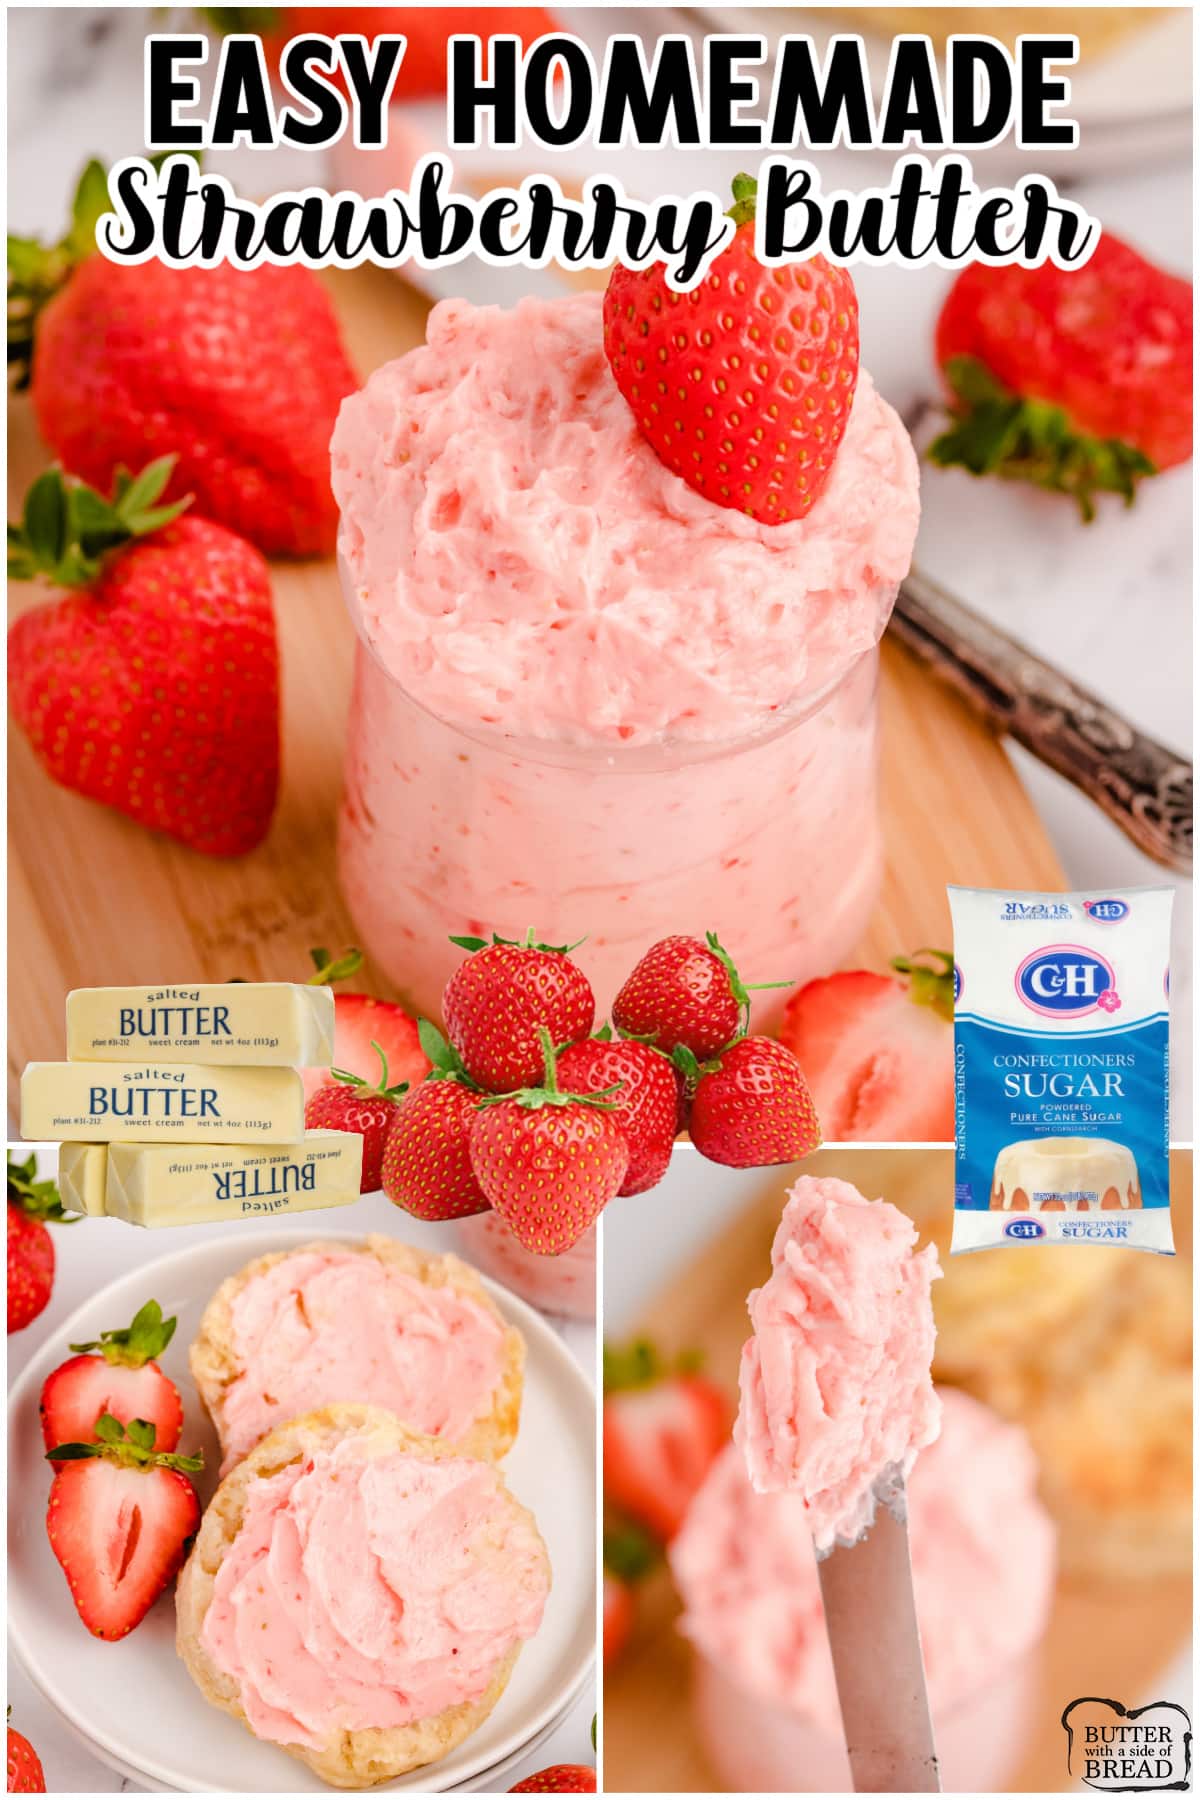 Strawberry Butter a simple and delightful fresh fruit spread that is great on biscuits, rolls and toast! It takes only 3 ingredients and just 5 minutes to make this amazing strawberry butter recipe.